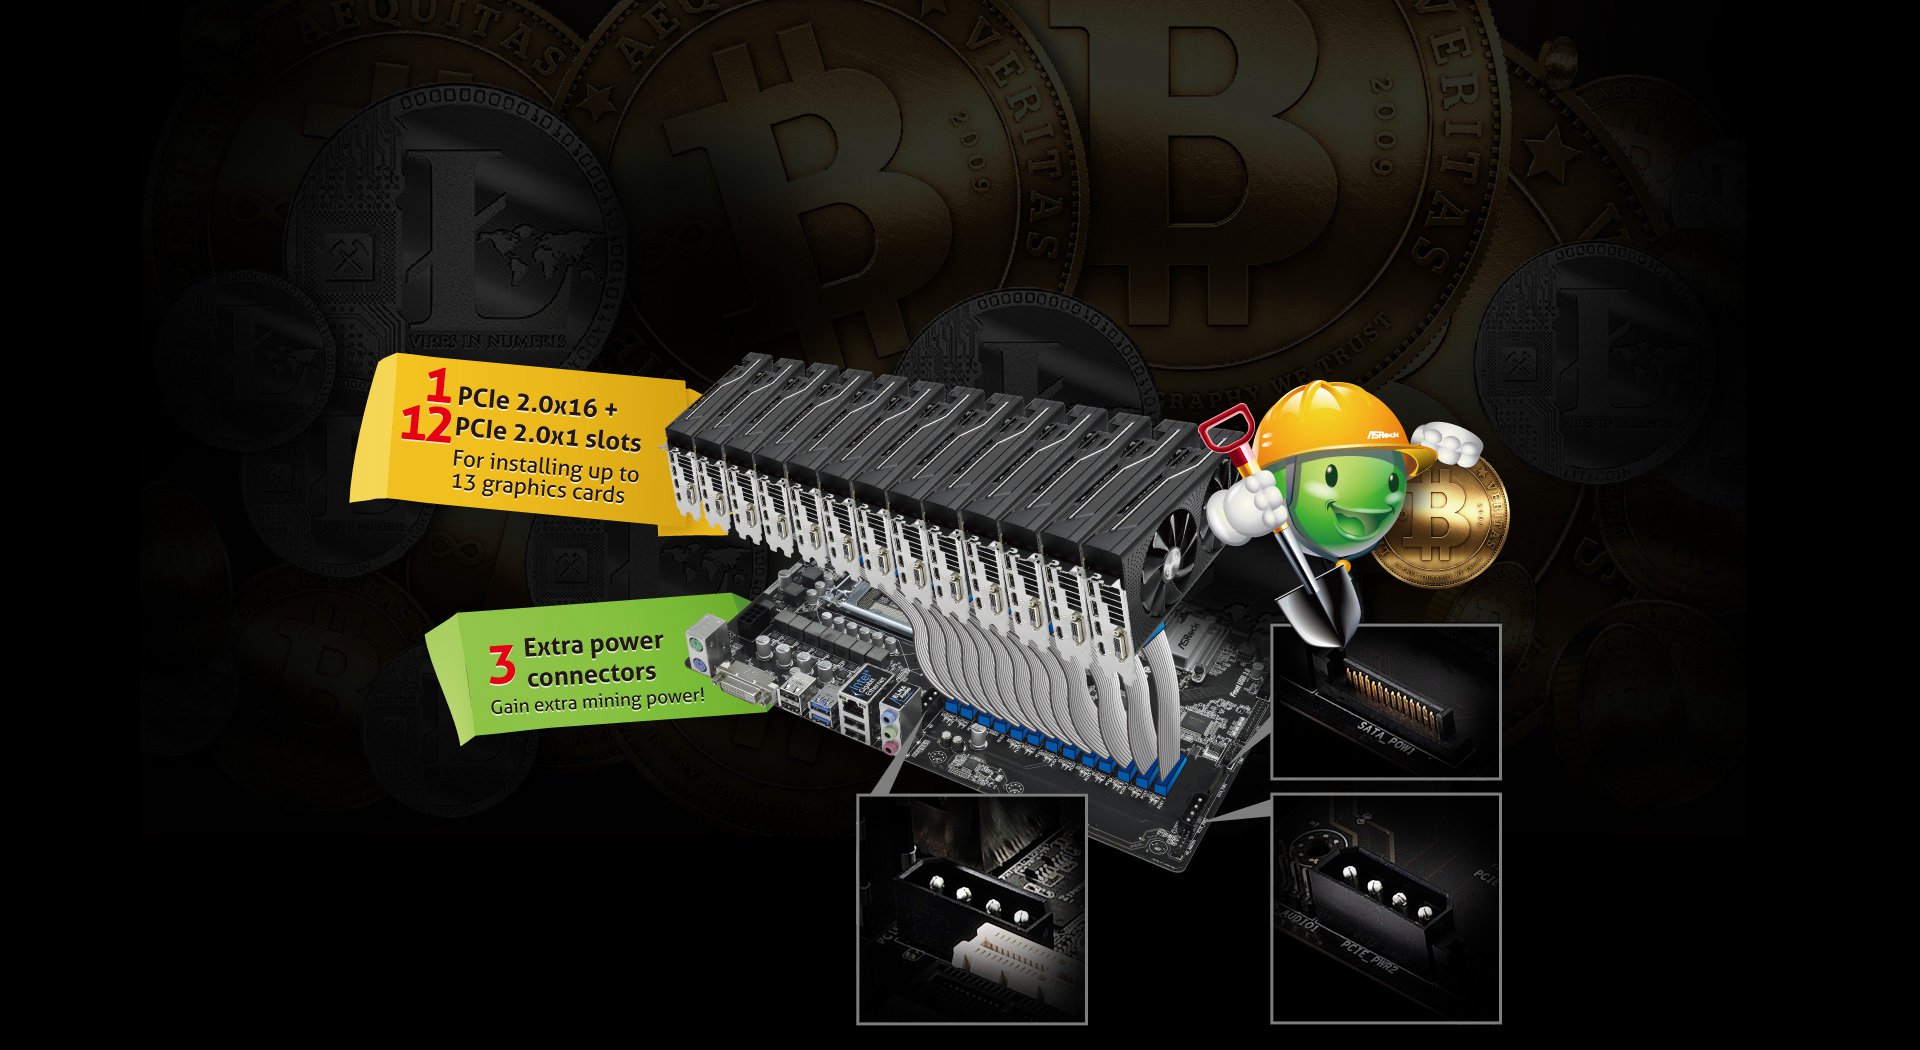 Asrock h110 pro btc cpu intel core 2 quad compatibility can you buy stocks with bitcoins